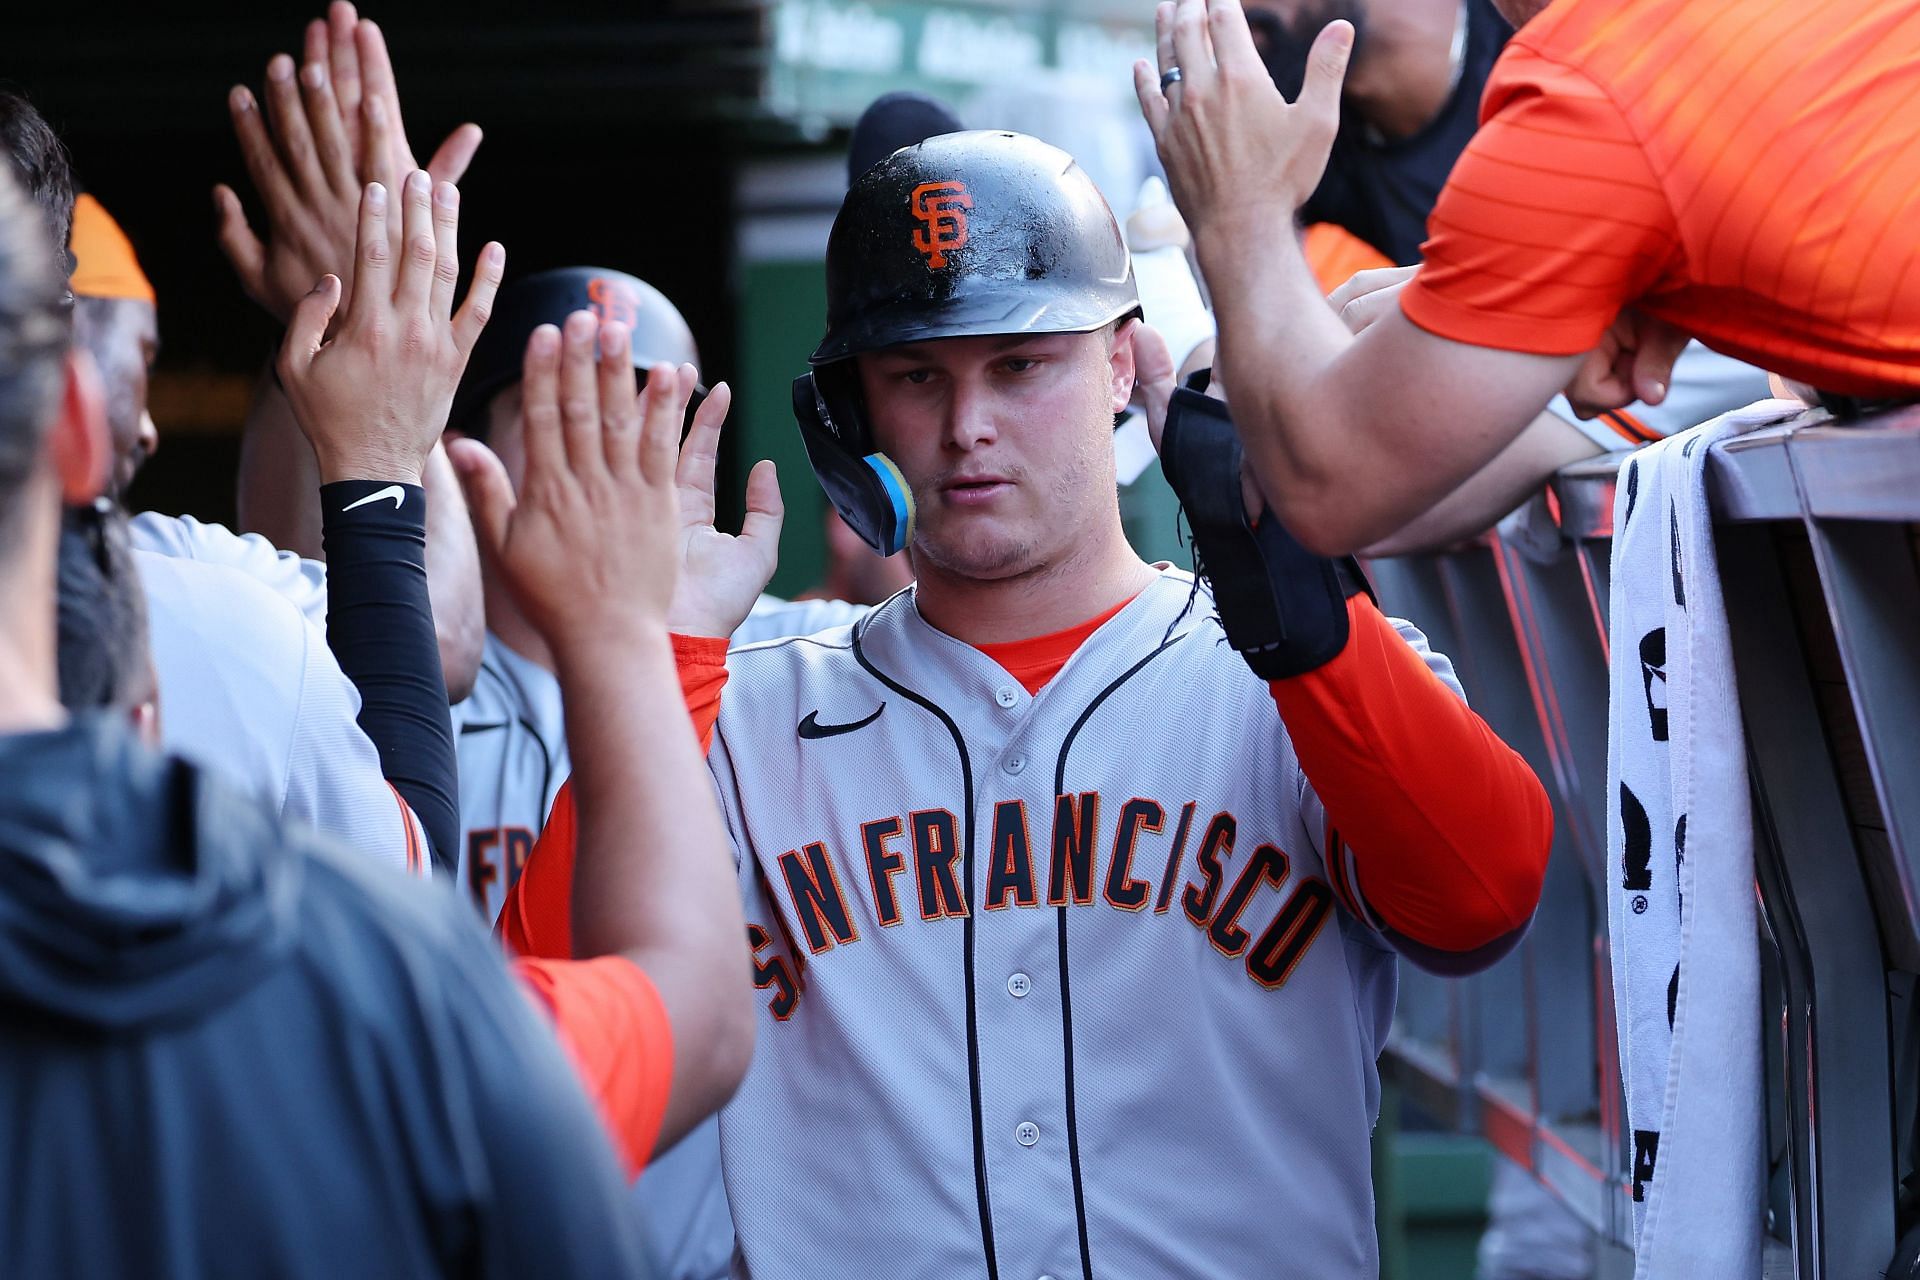 Joc Pederson of the San Francisco Giants high fives teammates after scoring a run against the Chicago Cubs.